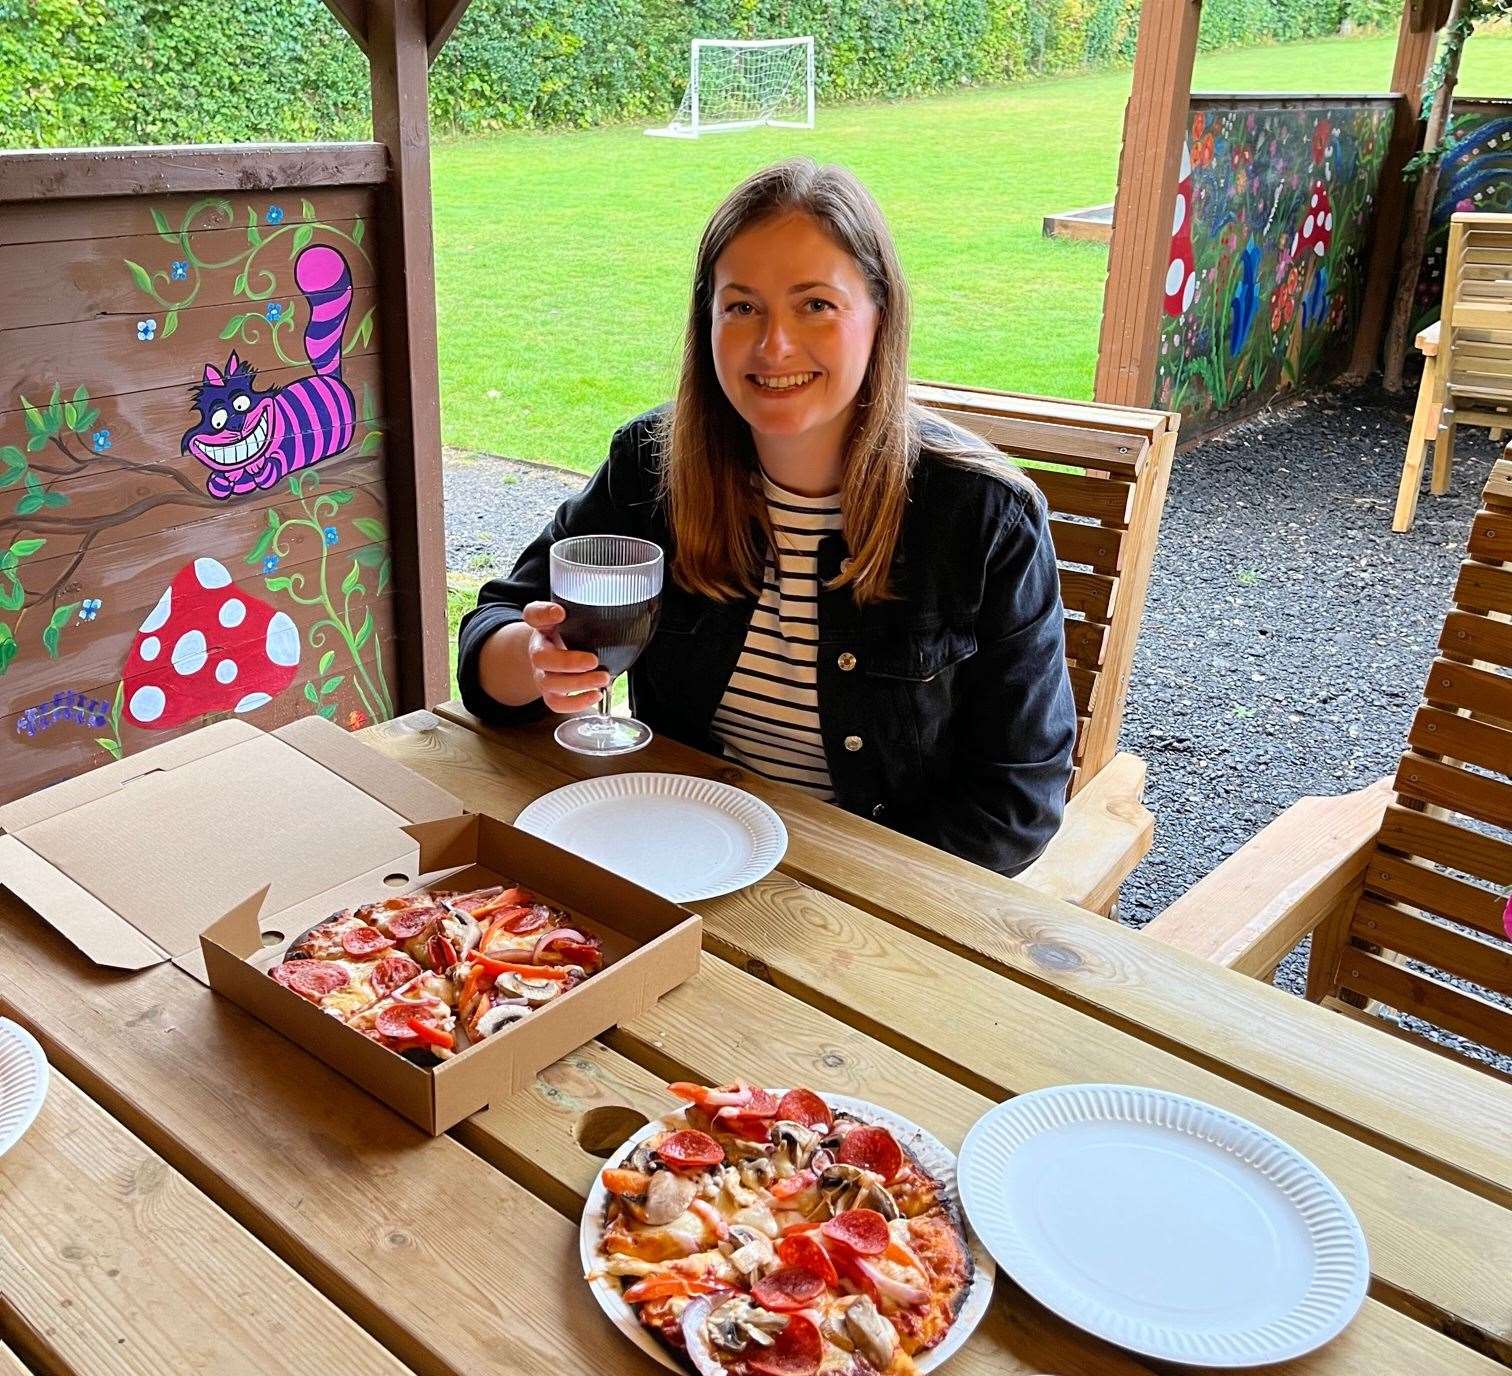 Enjoying our tasty but slightly charred pizzas, fresh from the wood-fired oven